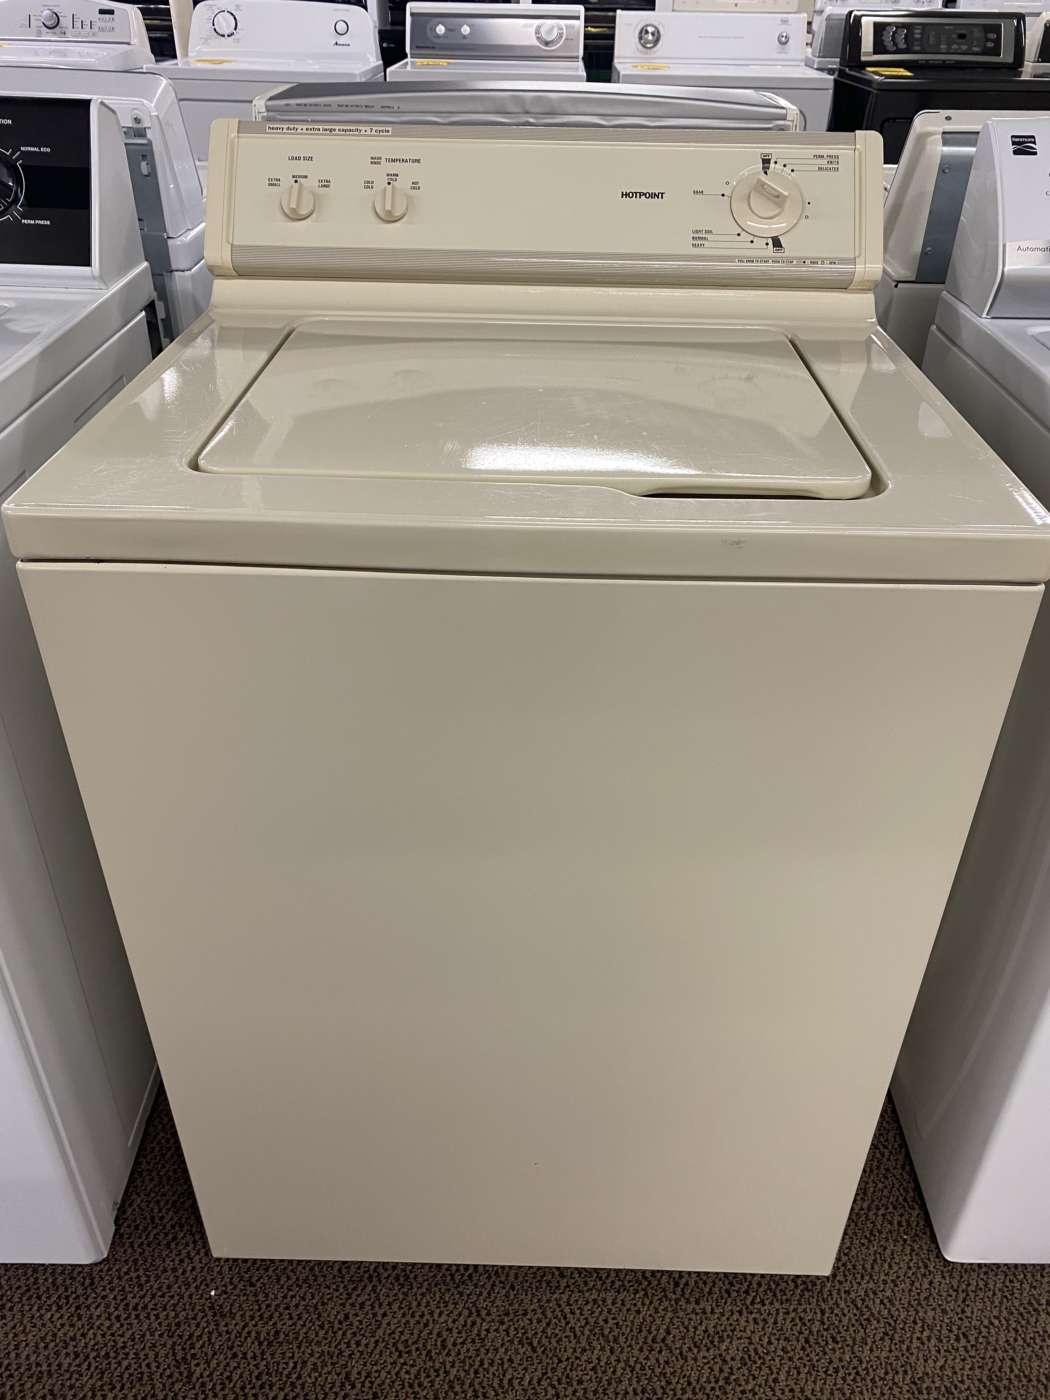 Reconditioned HOTPOINT 2.7 Cu. Ft. Top-Load Washer – Almond